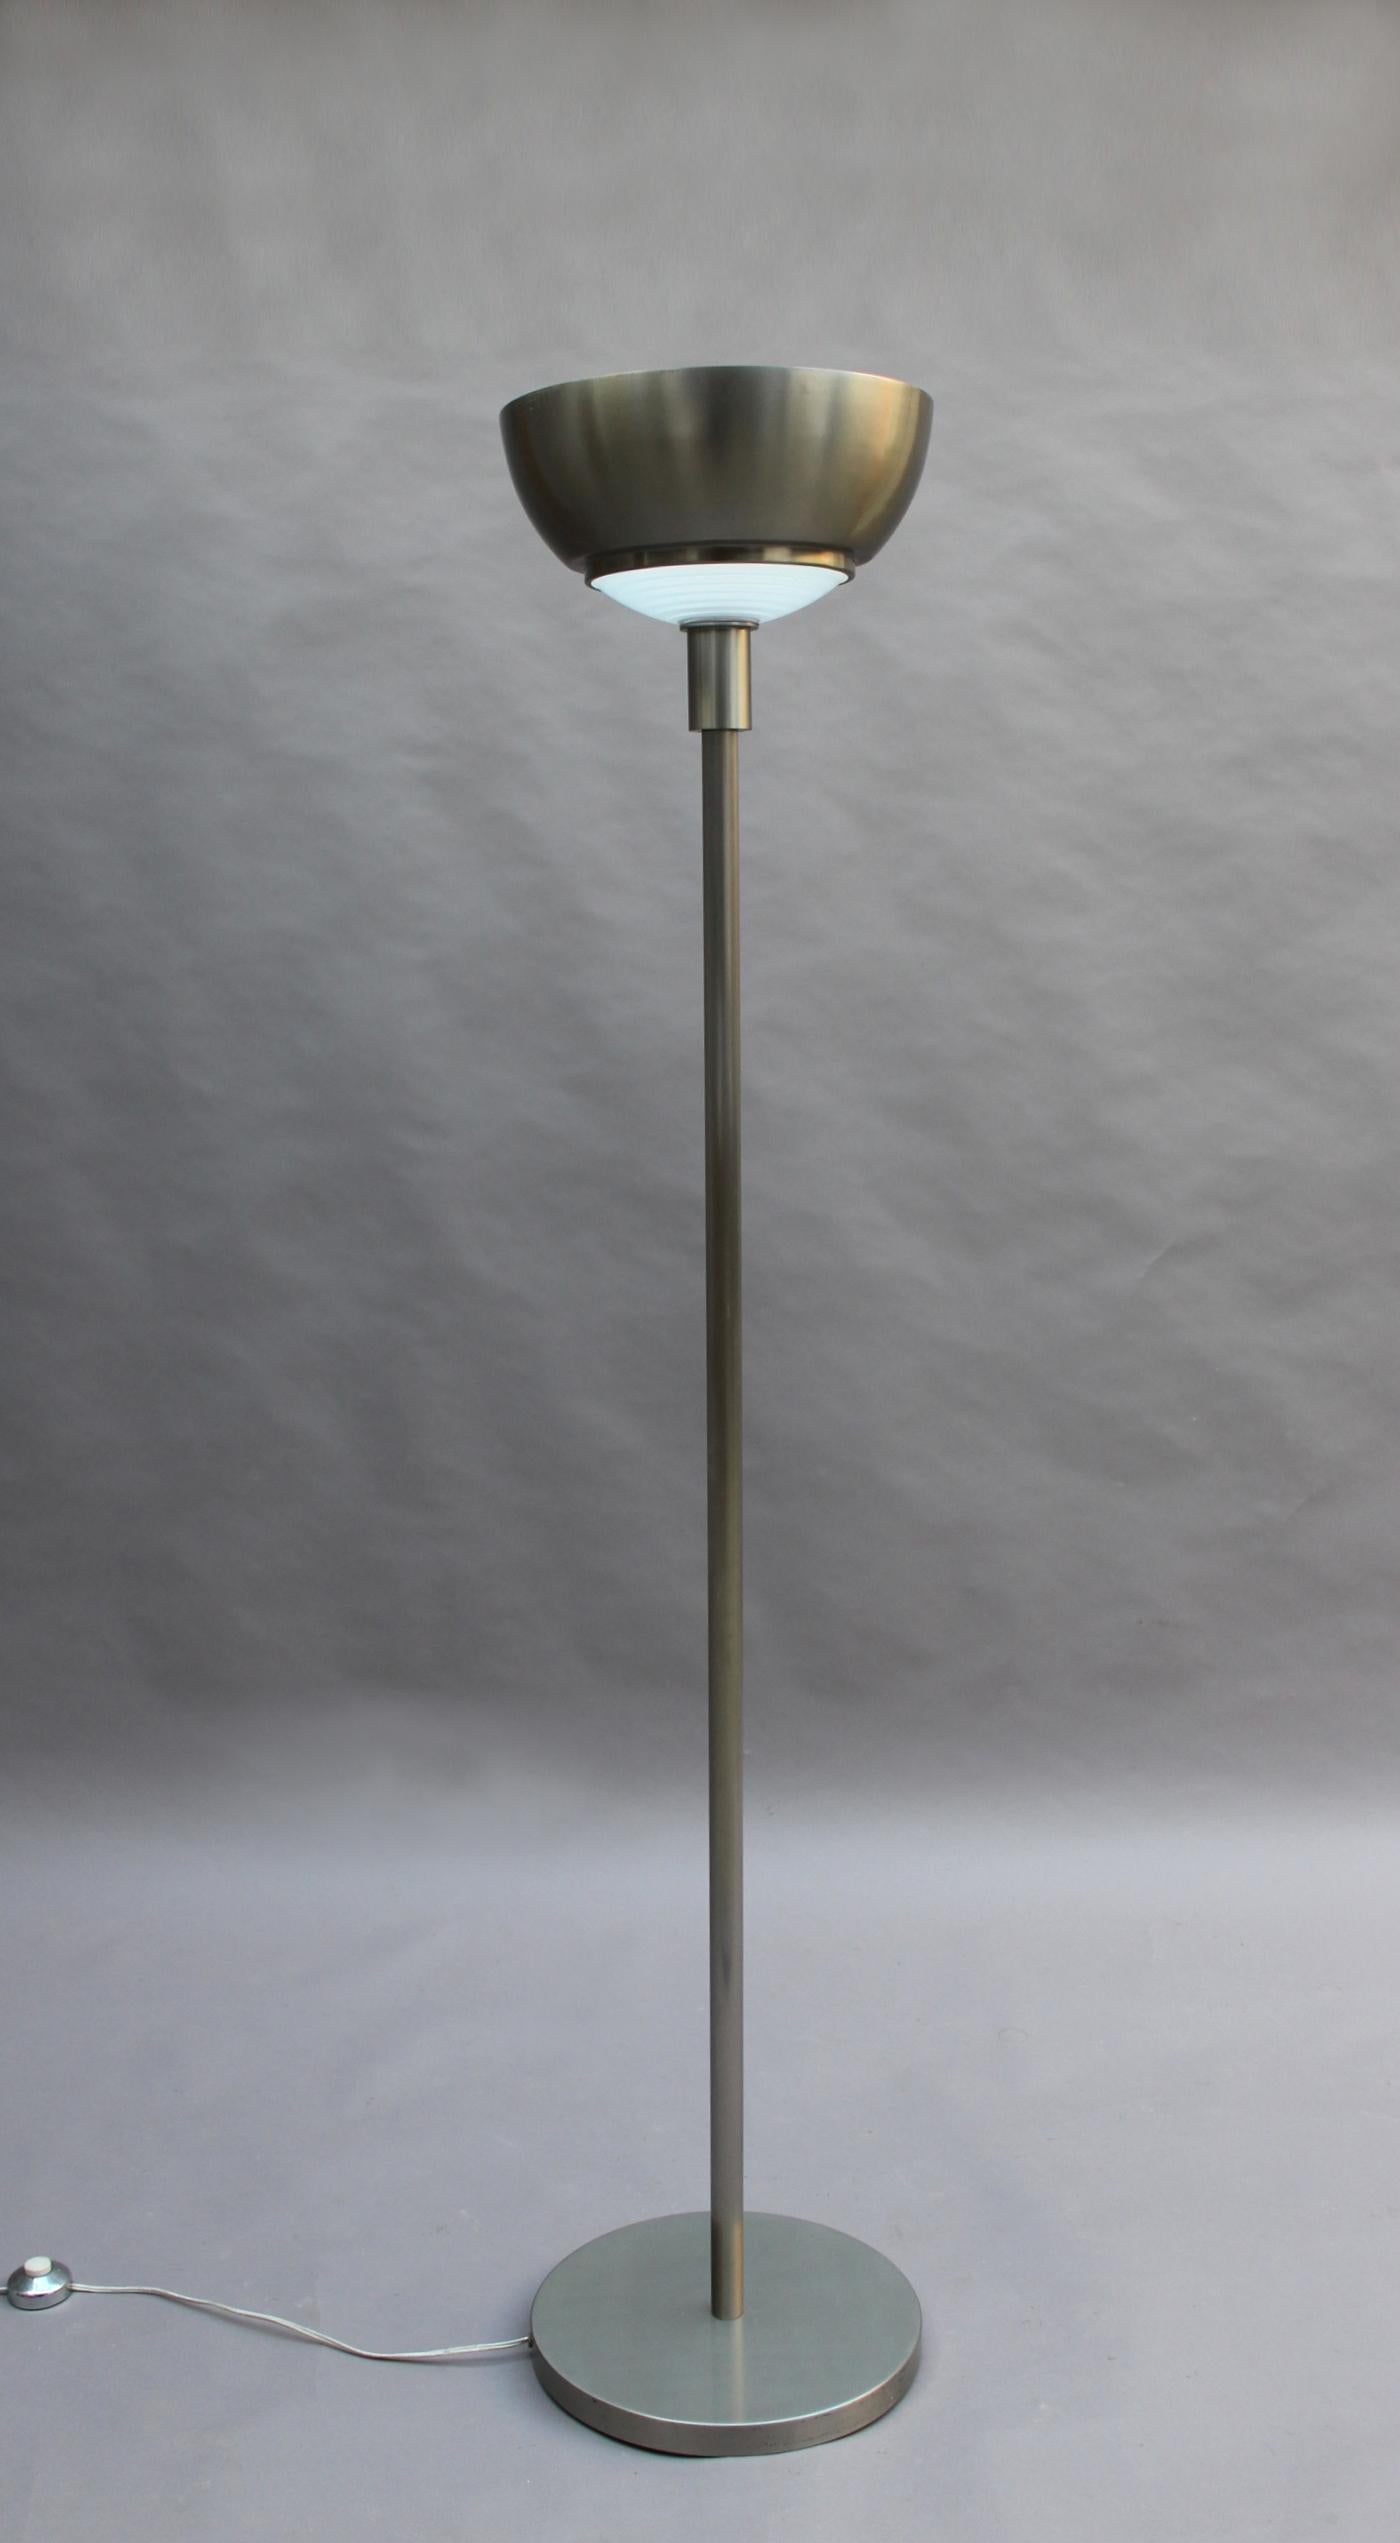 A fine French Art Deco brushed nickel floor lamp by Jean Perzel with a Fresnel glass lens.